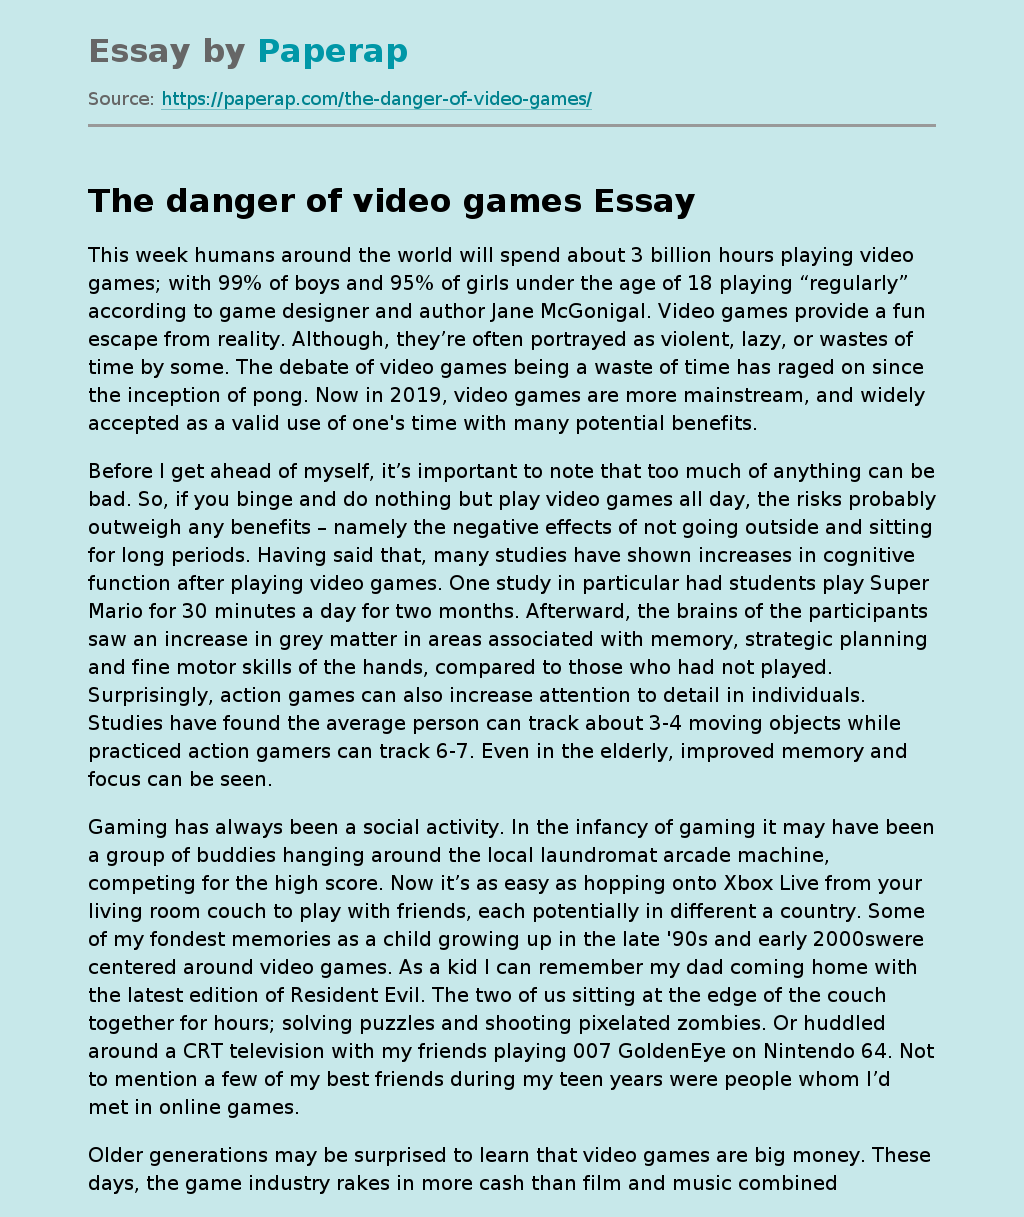 The danger of video games